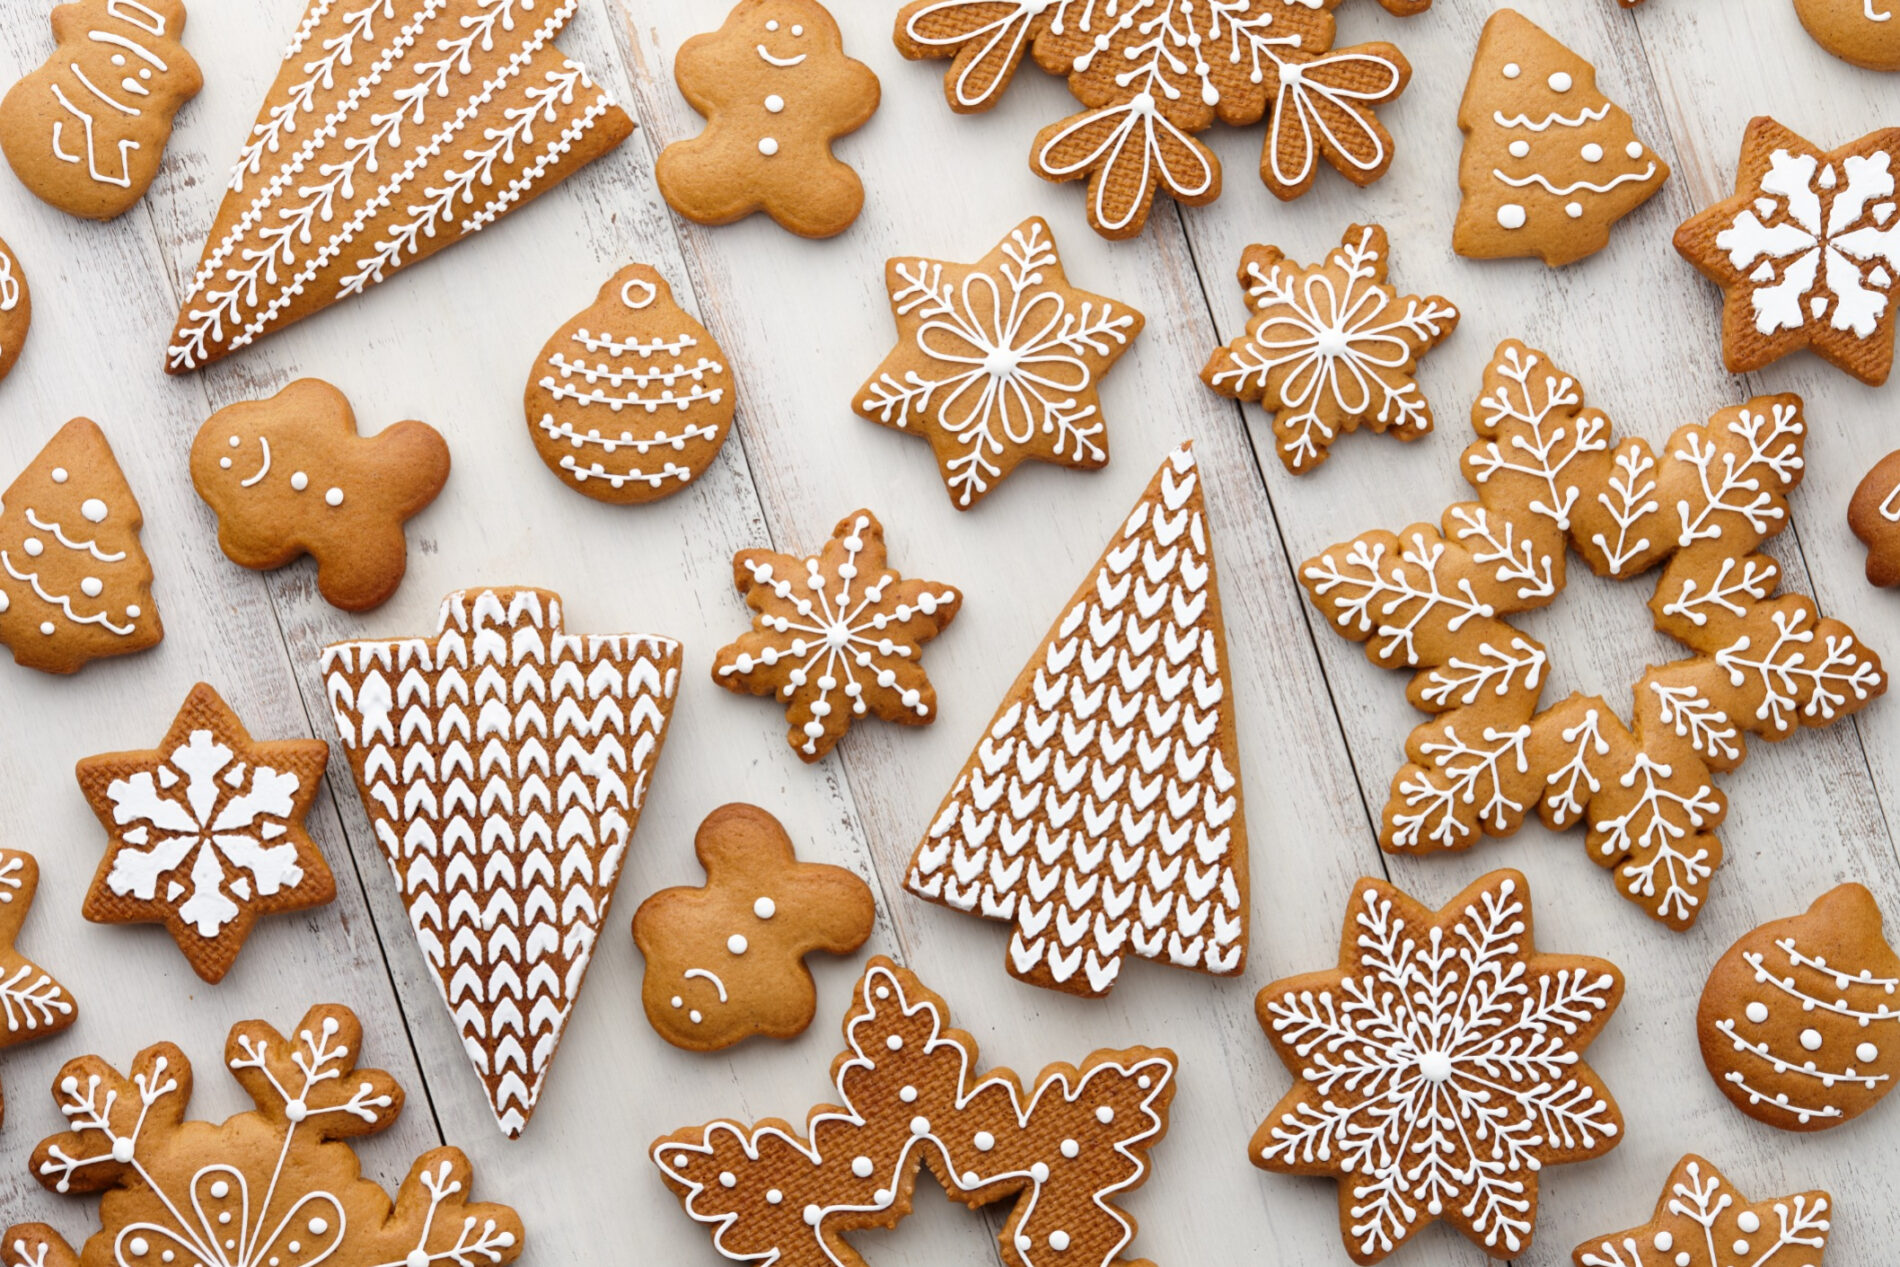 Brown Christmas biscuits with white sugar decoration